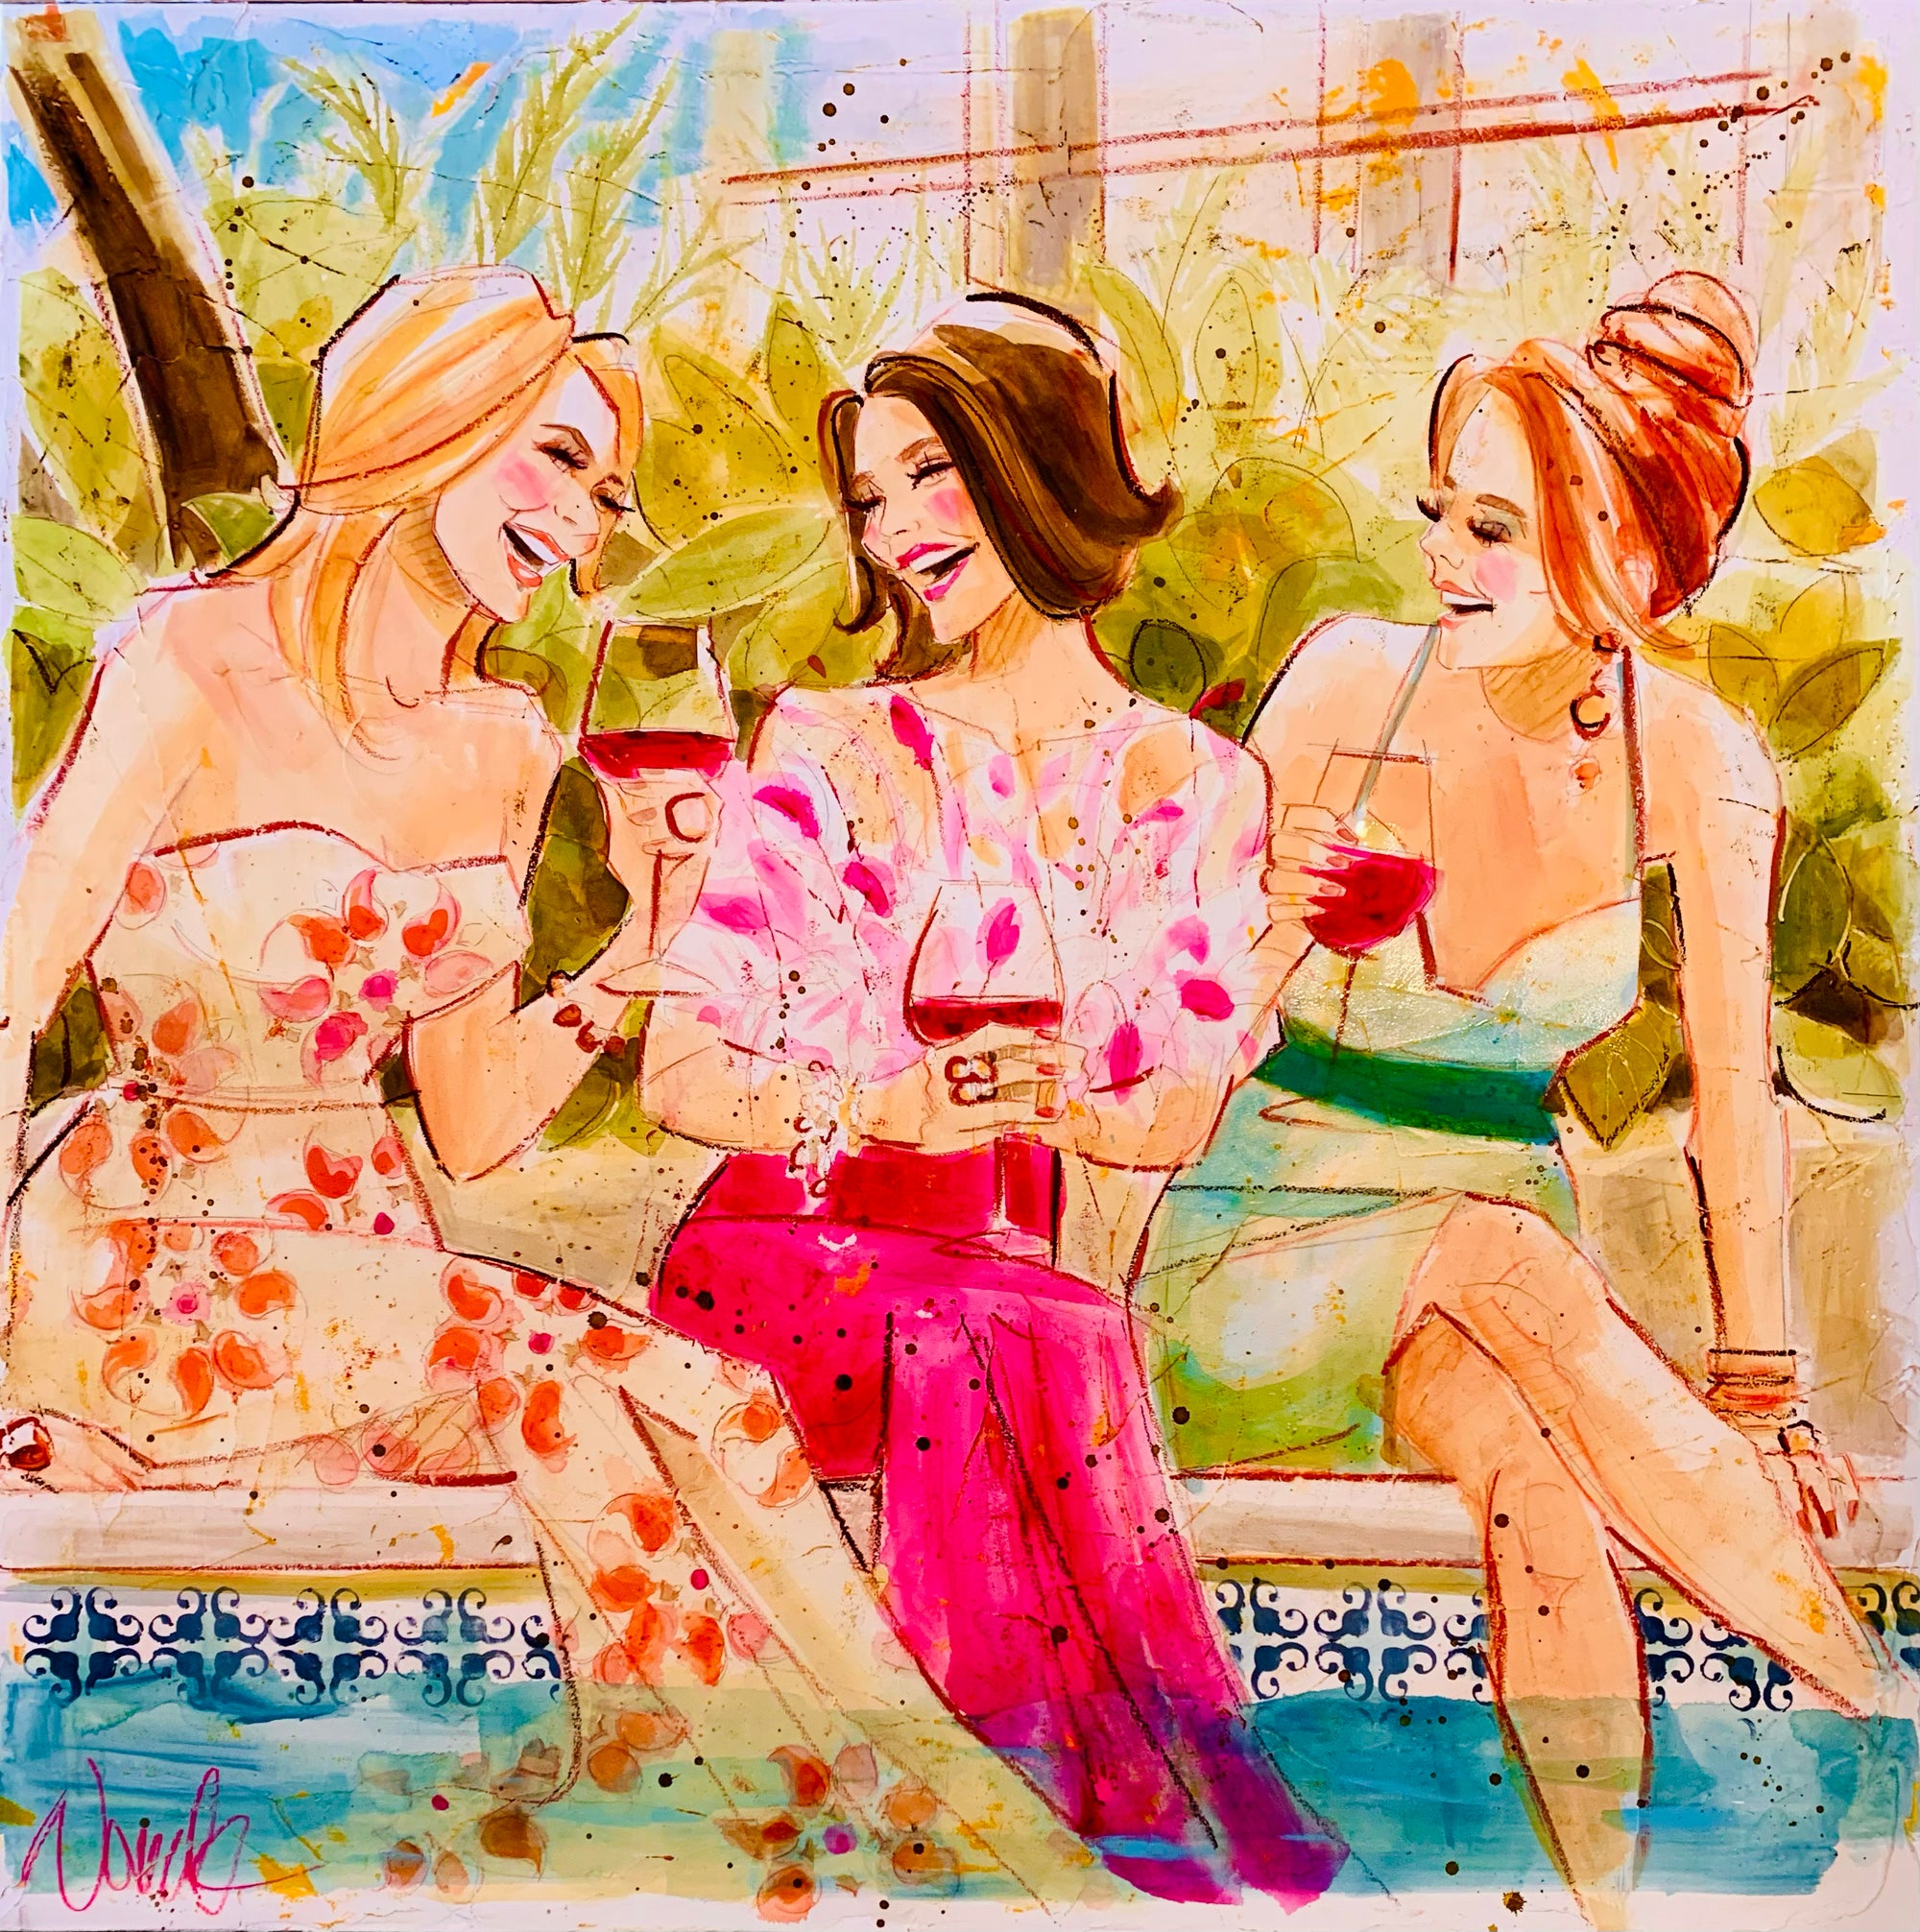 Women and Wine® "Pretty In Pink" Edition